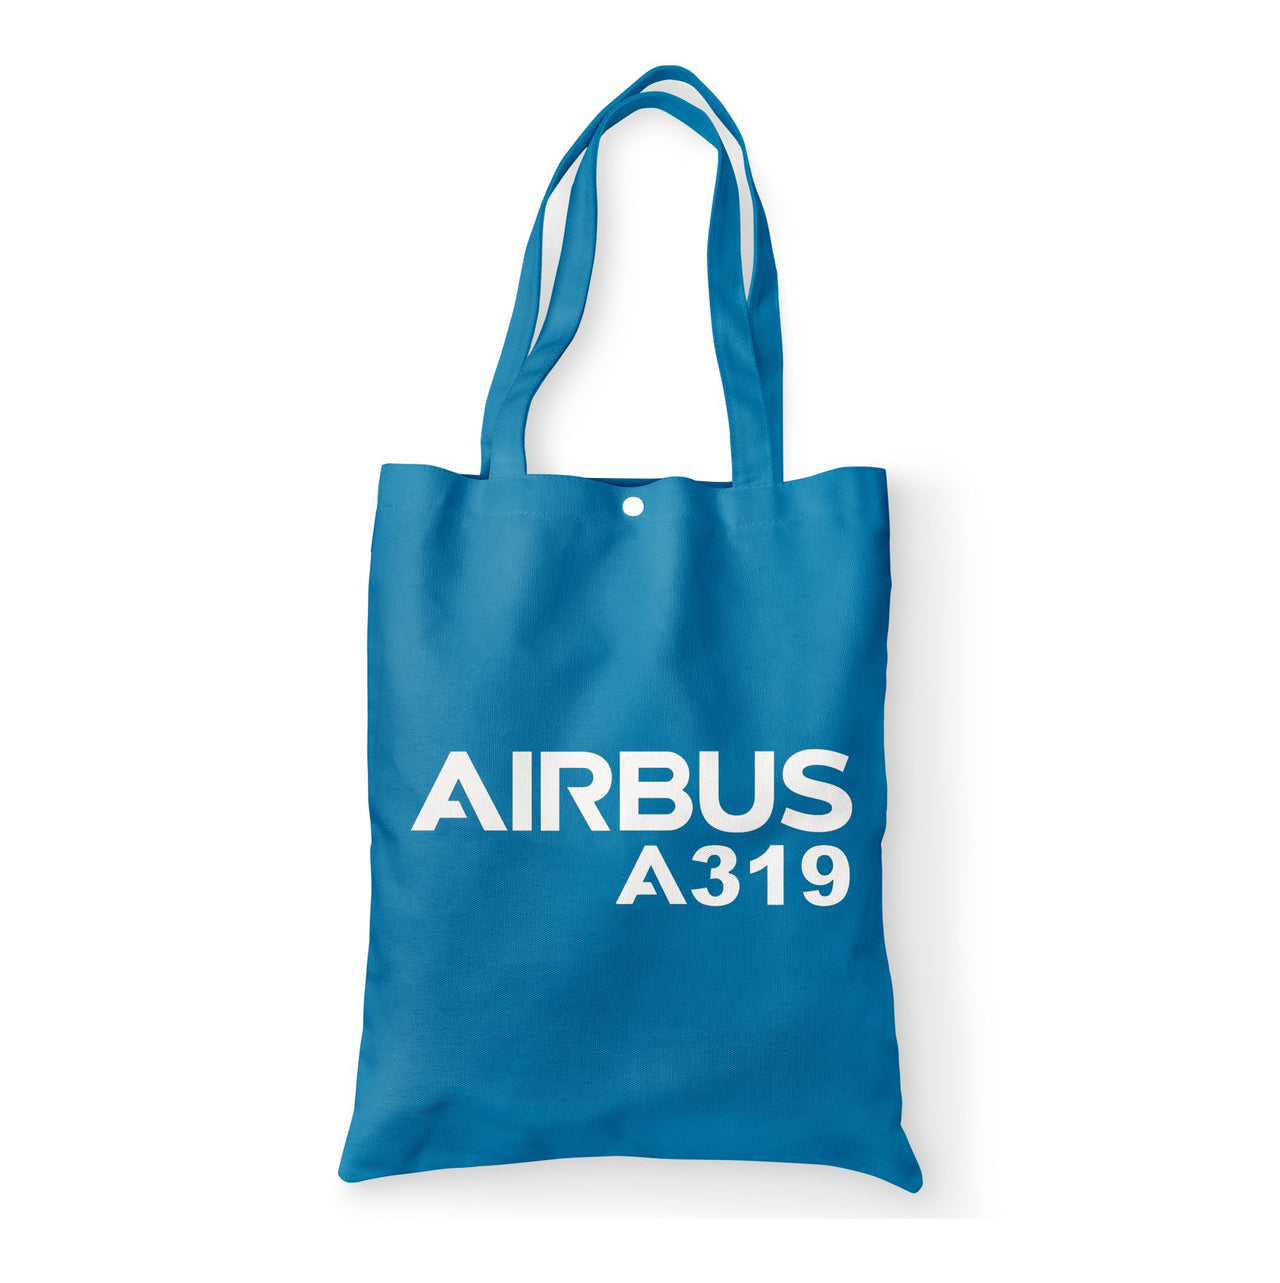 Airbus A319 & Text Designed Tote Bags